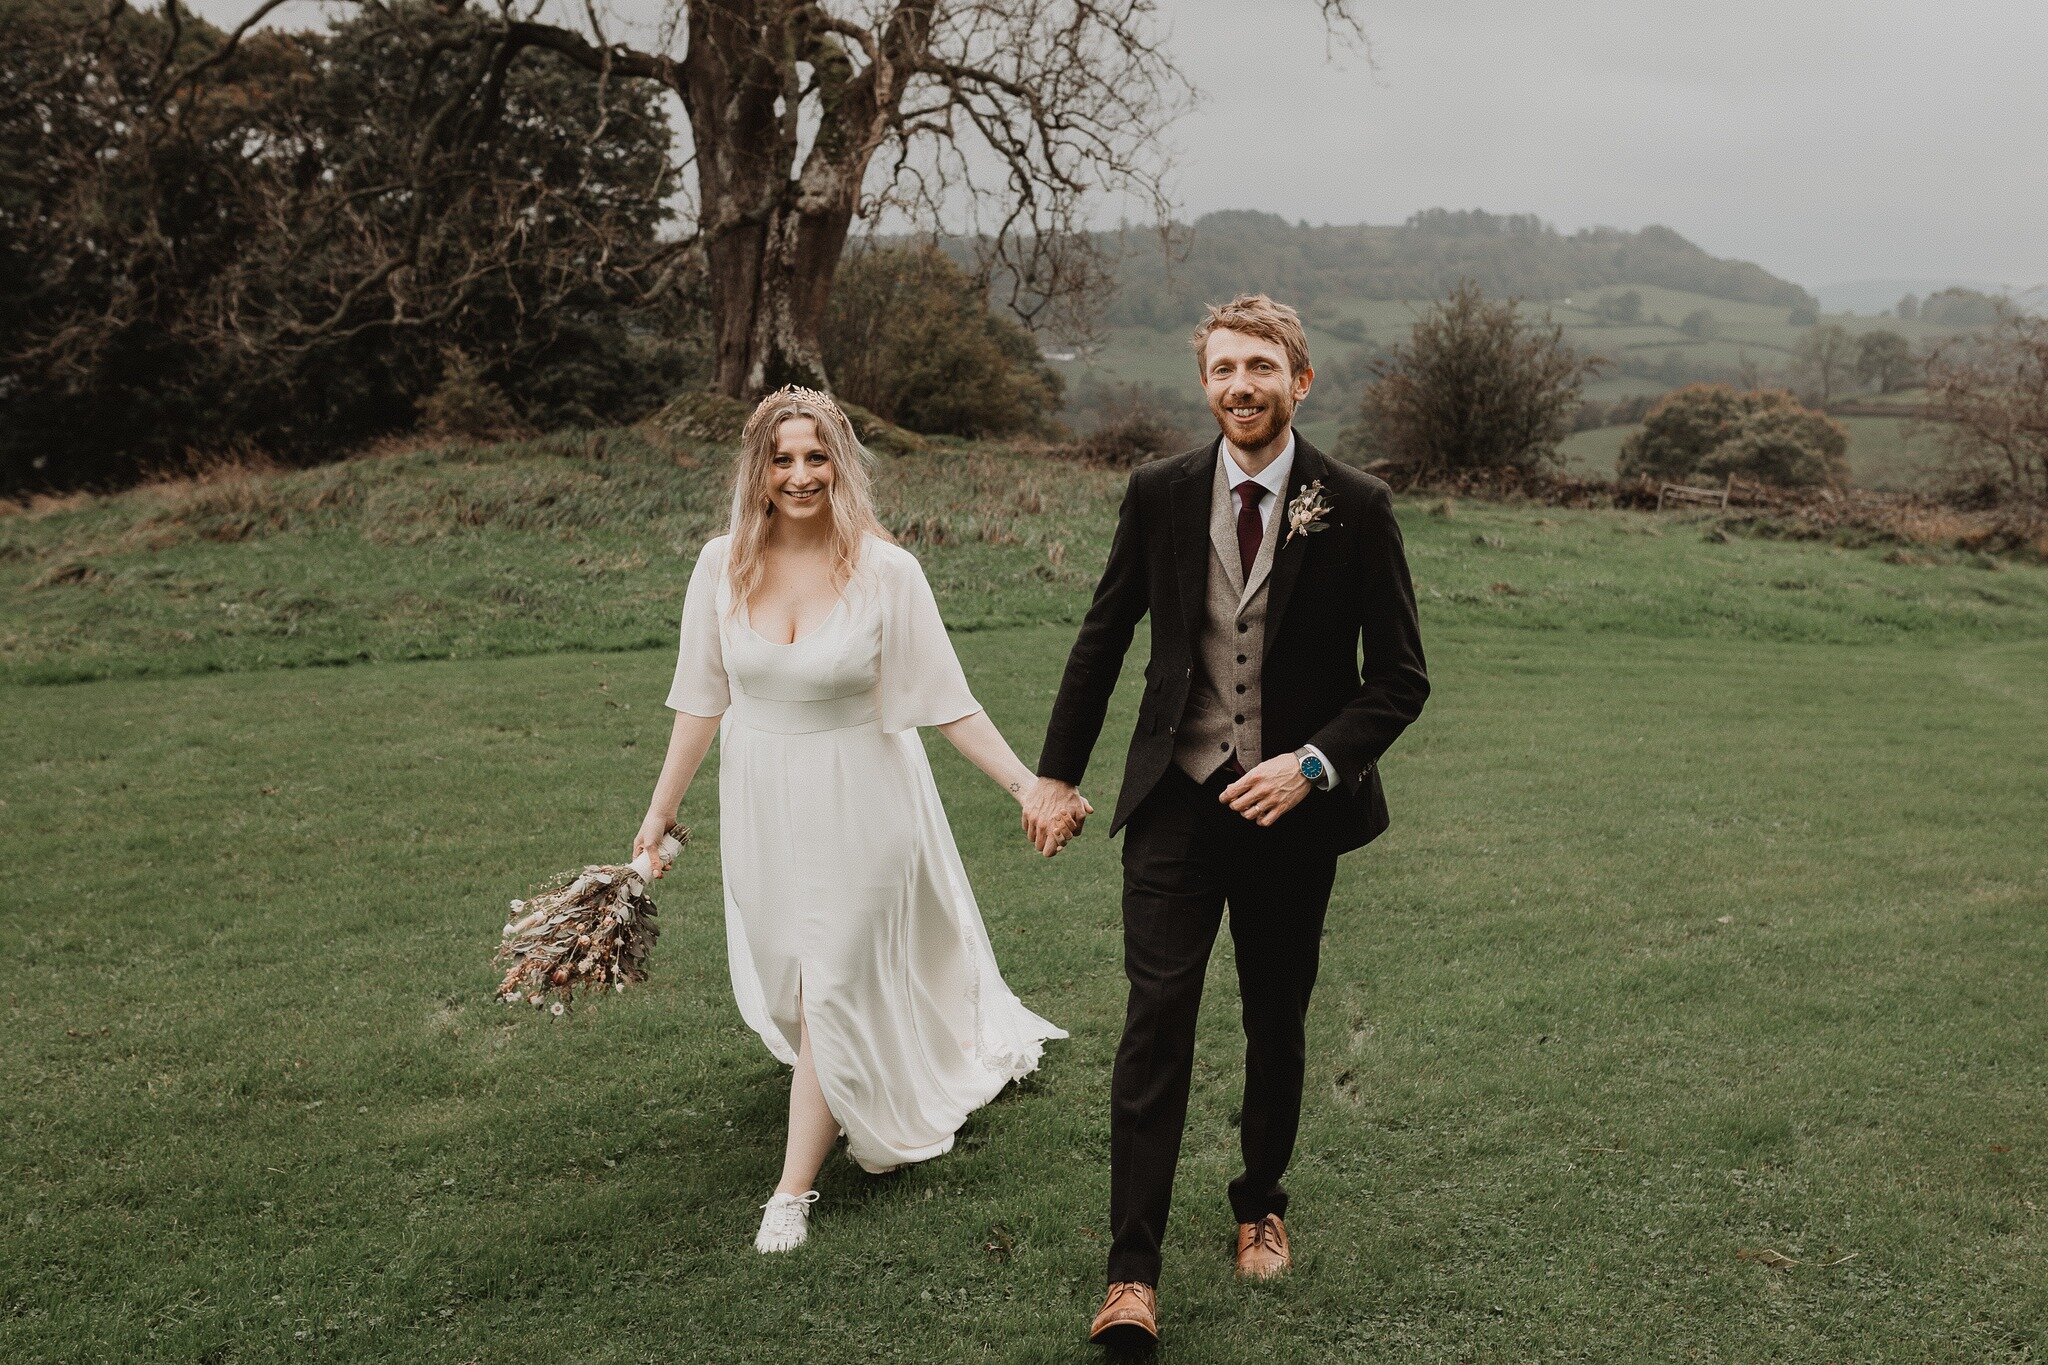 The most magical of galleries went out last week! 

Such an incredible wedding day for Becky + Mike. A rustic Lake District barn wedding, relaxed vibes, misty skies and a roam through the countryside after an epic confetti throw. 

Cheers to you two!